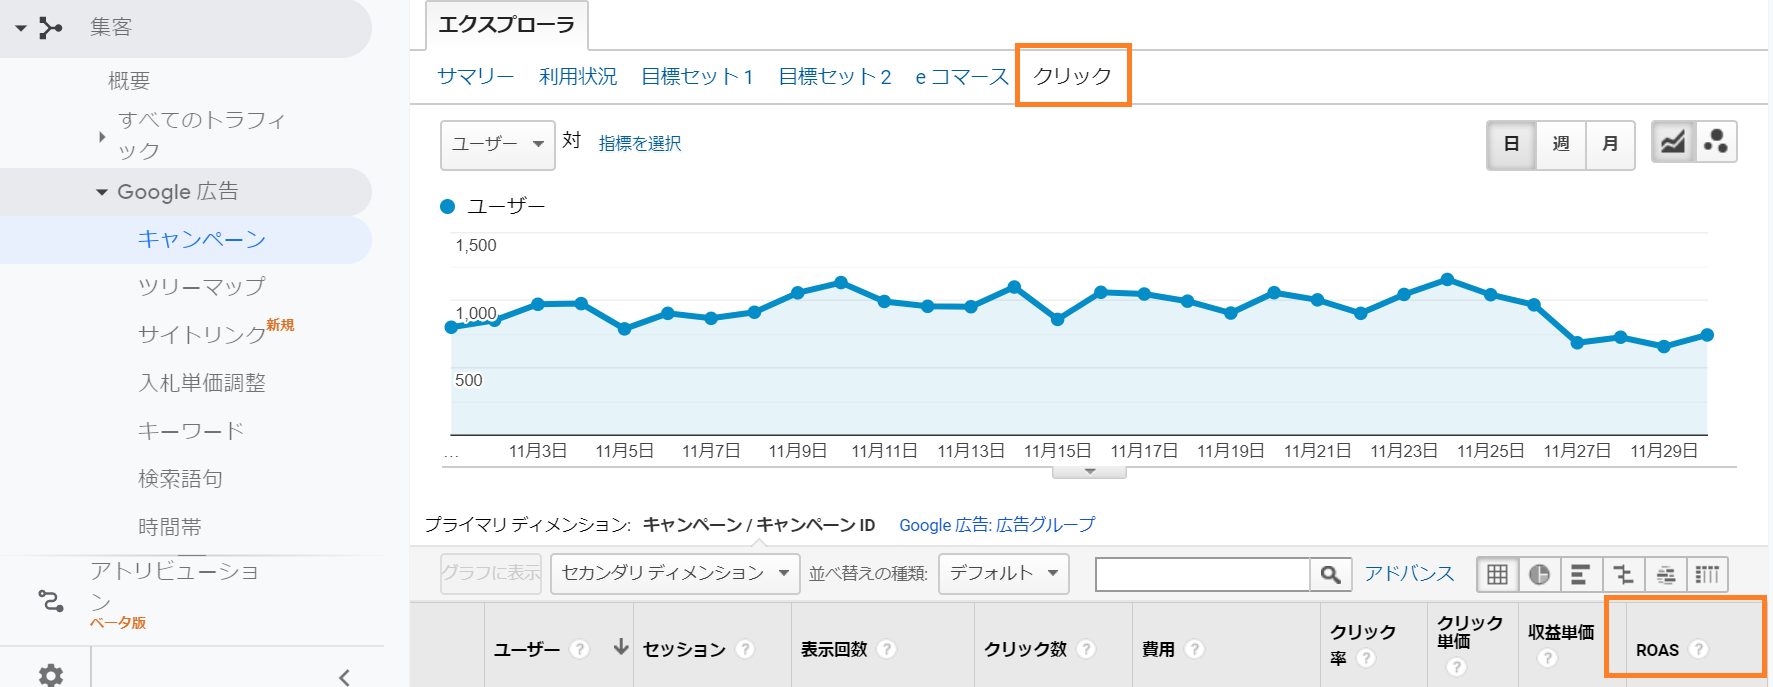 google-analytics-roas-by-click-explorer-ads-report.png